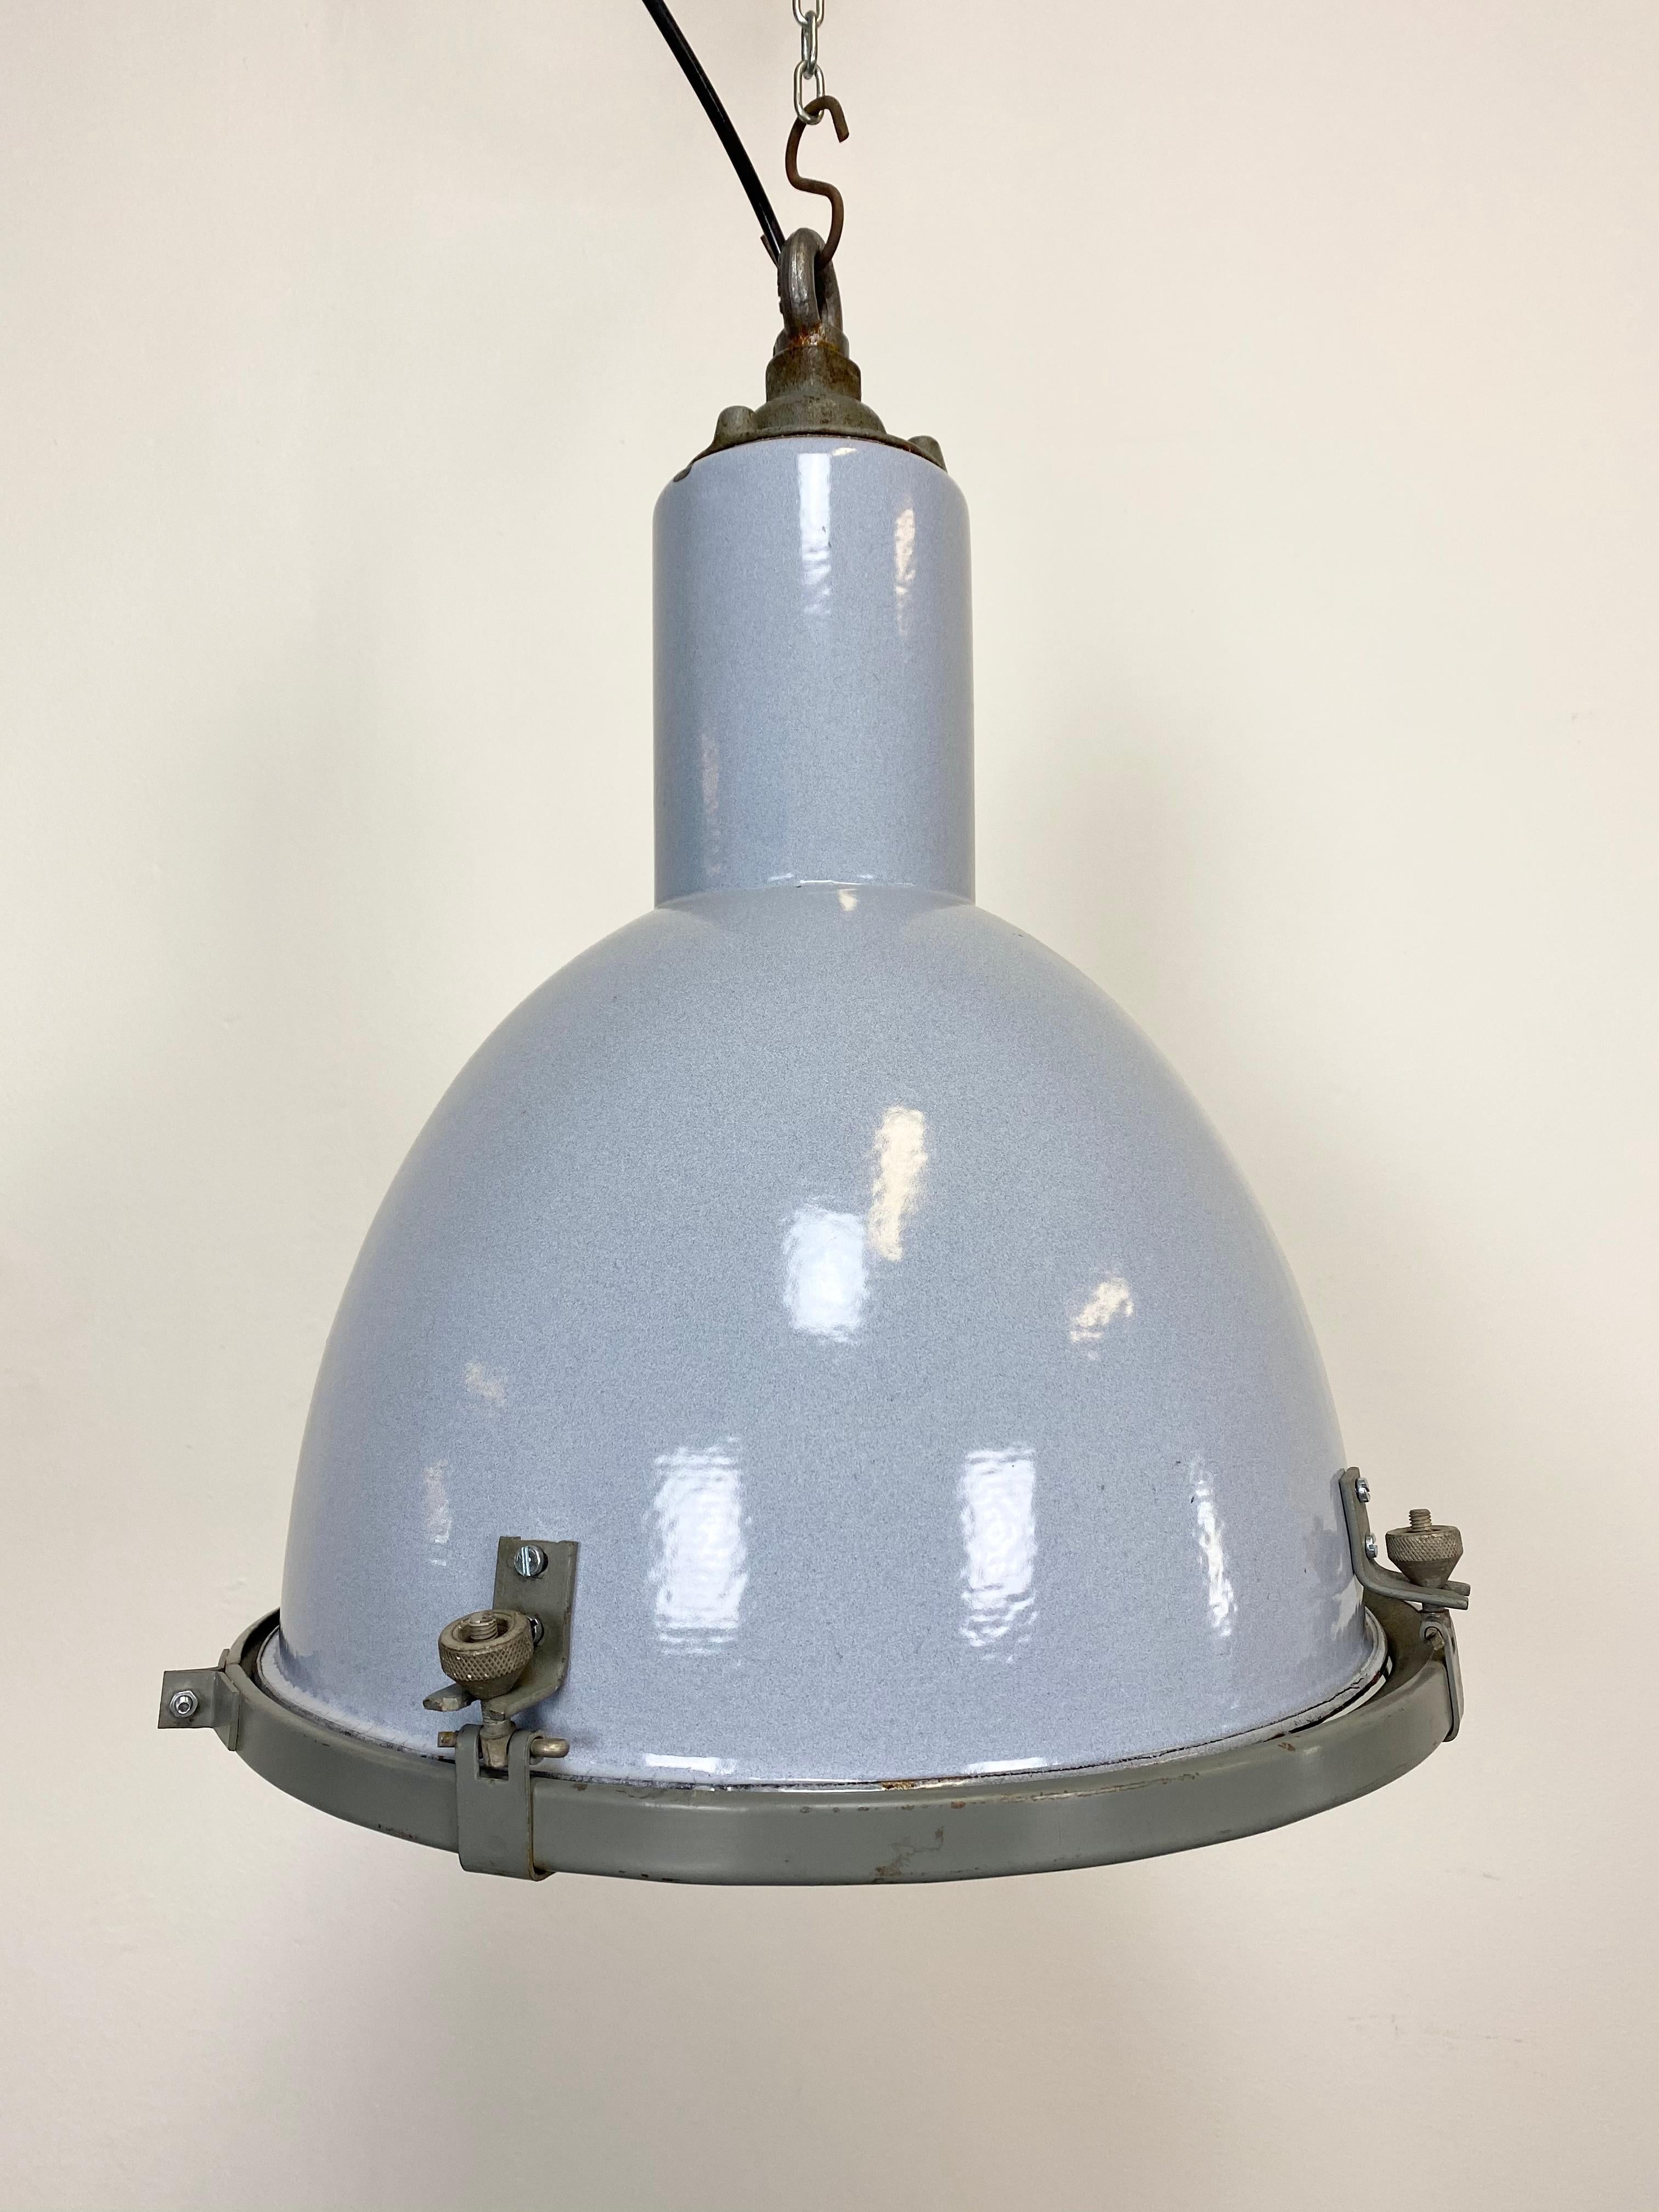 Vintage Industrial lamp made in former Czechoslovakia during the 1940s. It features a grey enamel shade with white interior, iron top and clear glass cover. New porcelain socket for E27 lightbulbs and new wire. The weight of the lamp is 4kg.